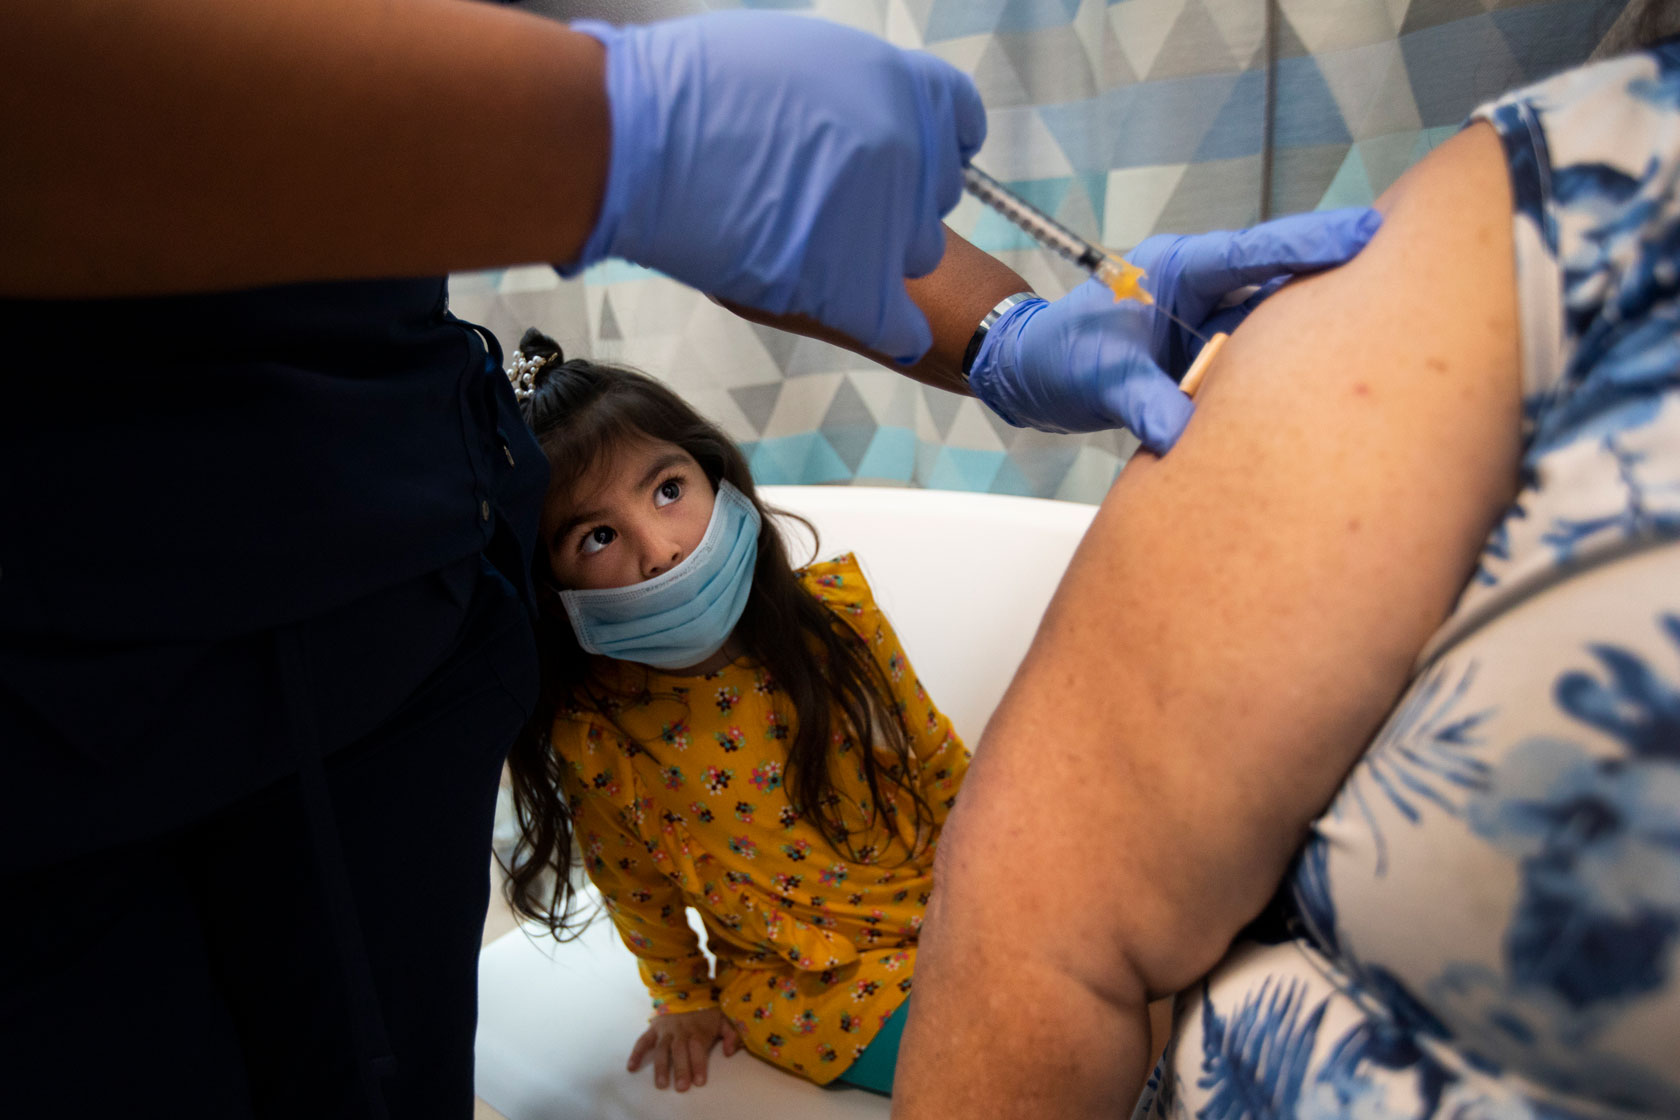 A 3-year-old girl keeps a close eye on the needle as both her grandparents are vaccinated.